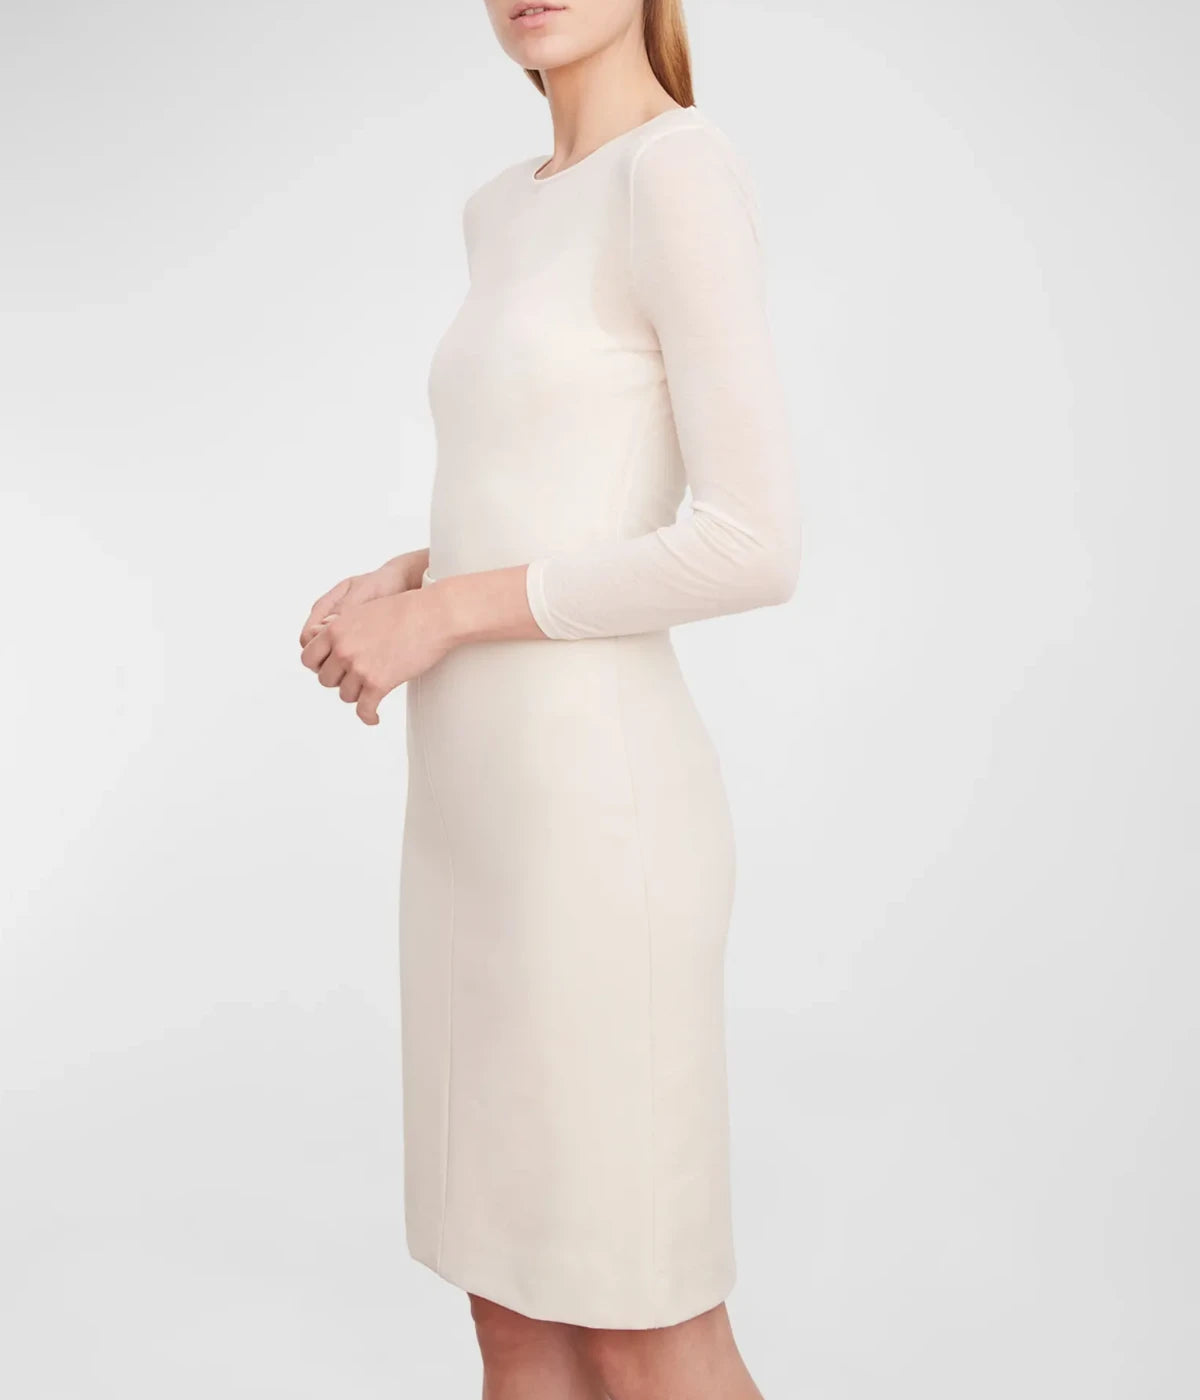 Seamed Front Pencil Skirt in Pale